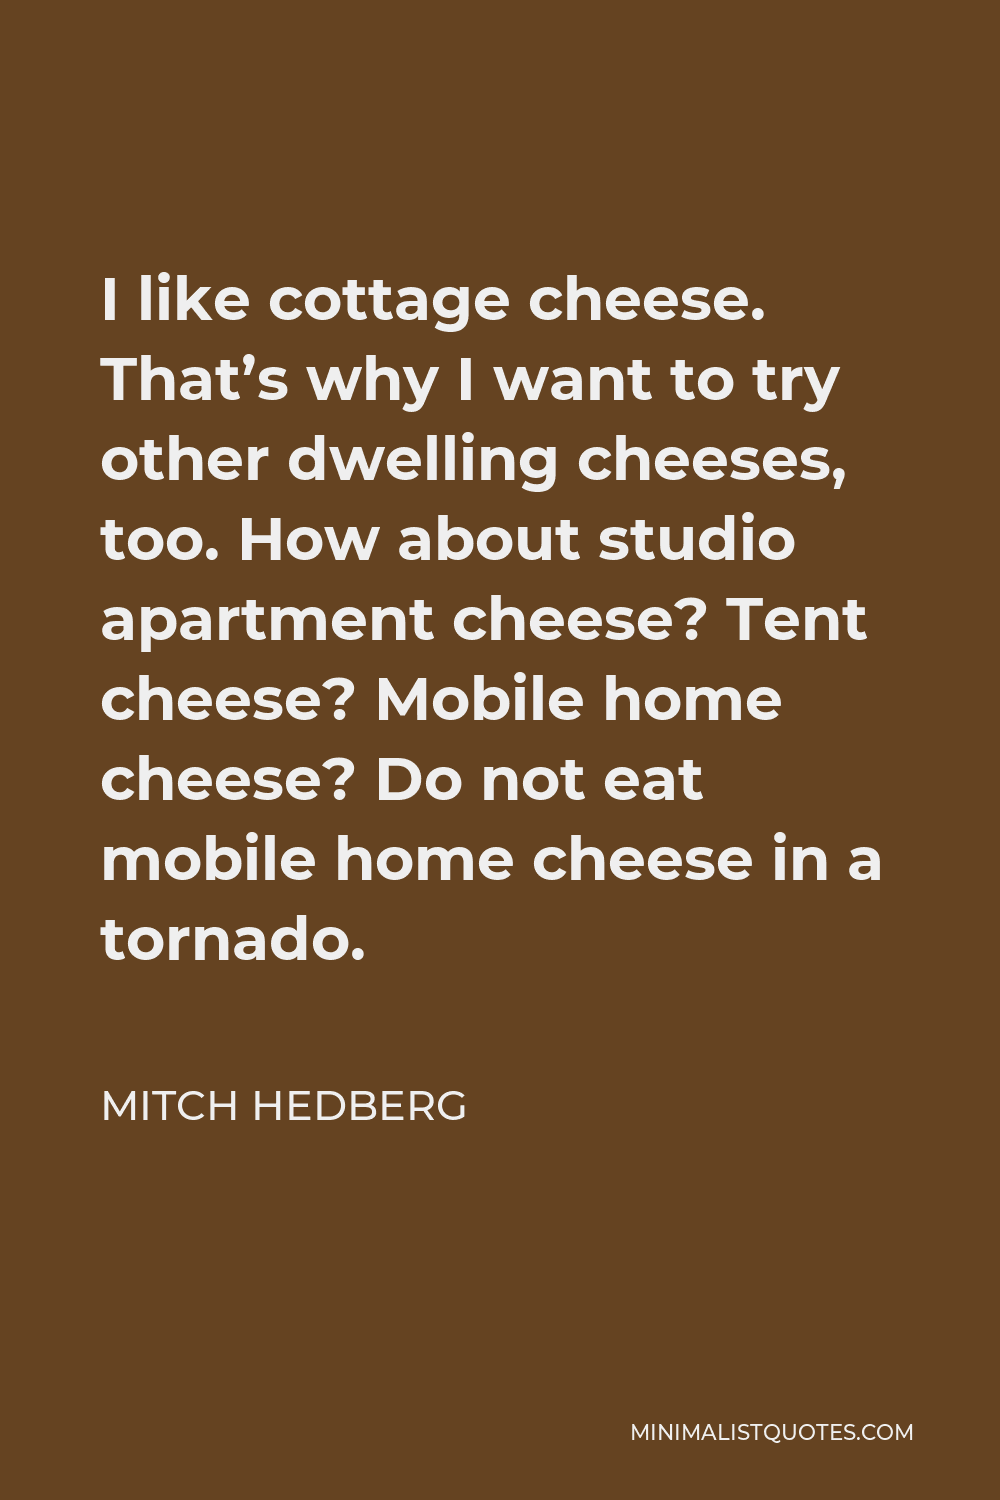 Mitch Hedberg Quote - I like cottage cheese. That’s why I want to try other dwelling cheeses, too. How about studio apartment cheese? Tent cheese? Mobile home cheese? Do not eat mobile home cheese in a tornado.